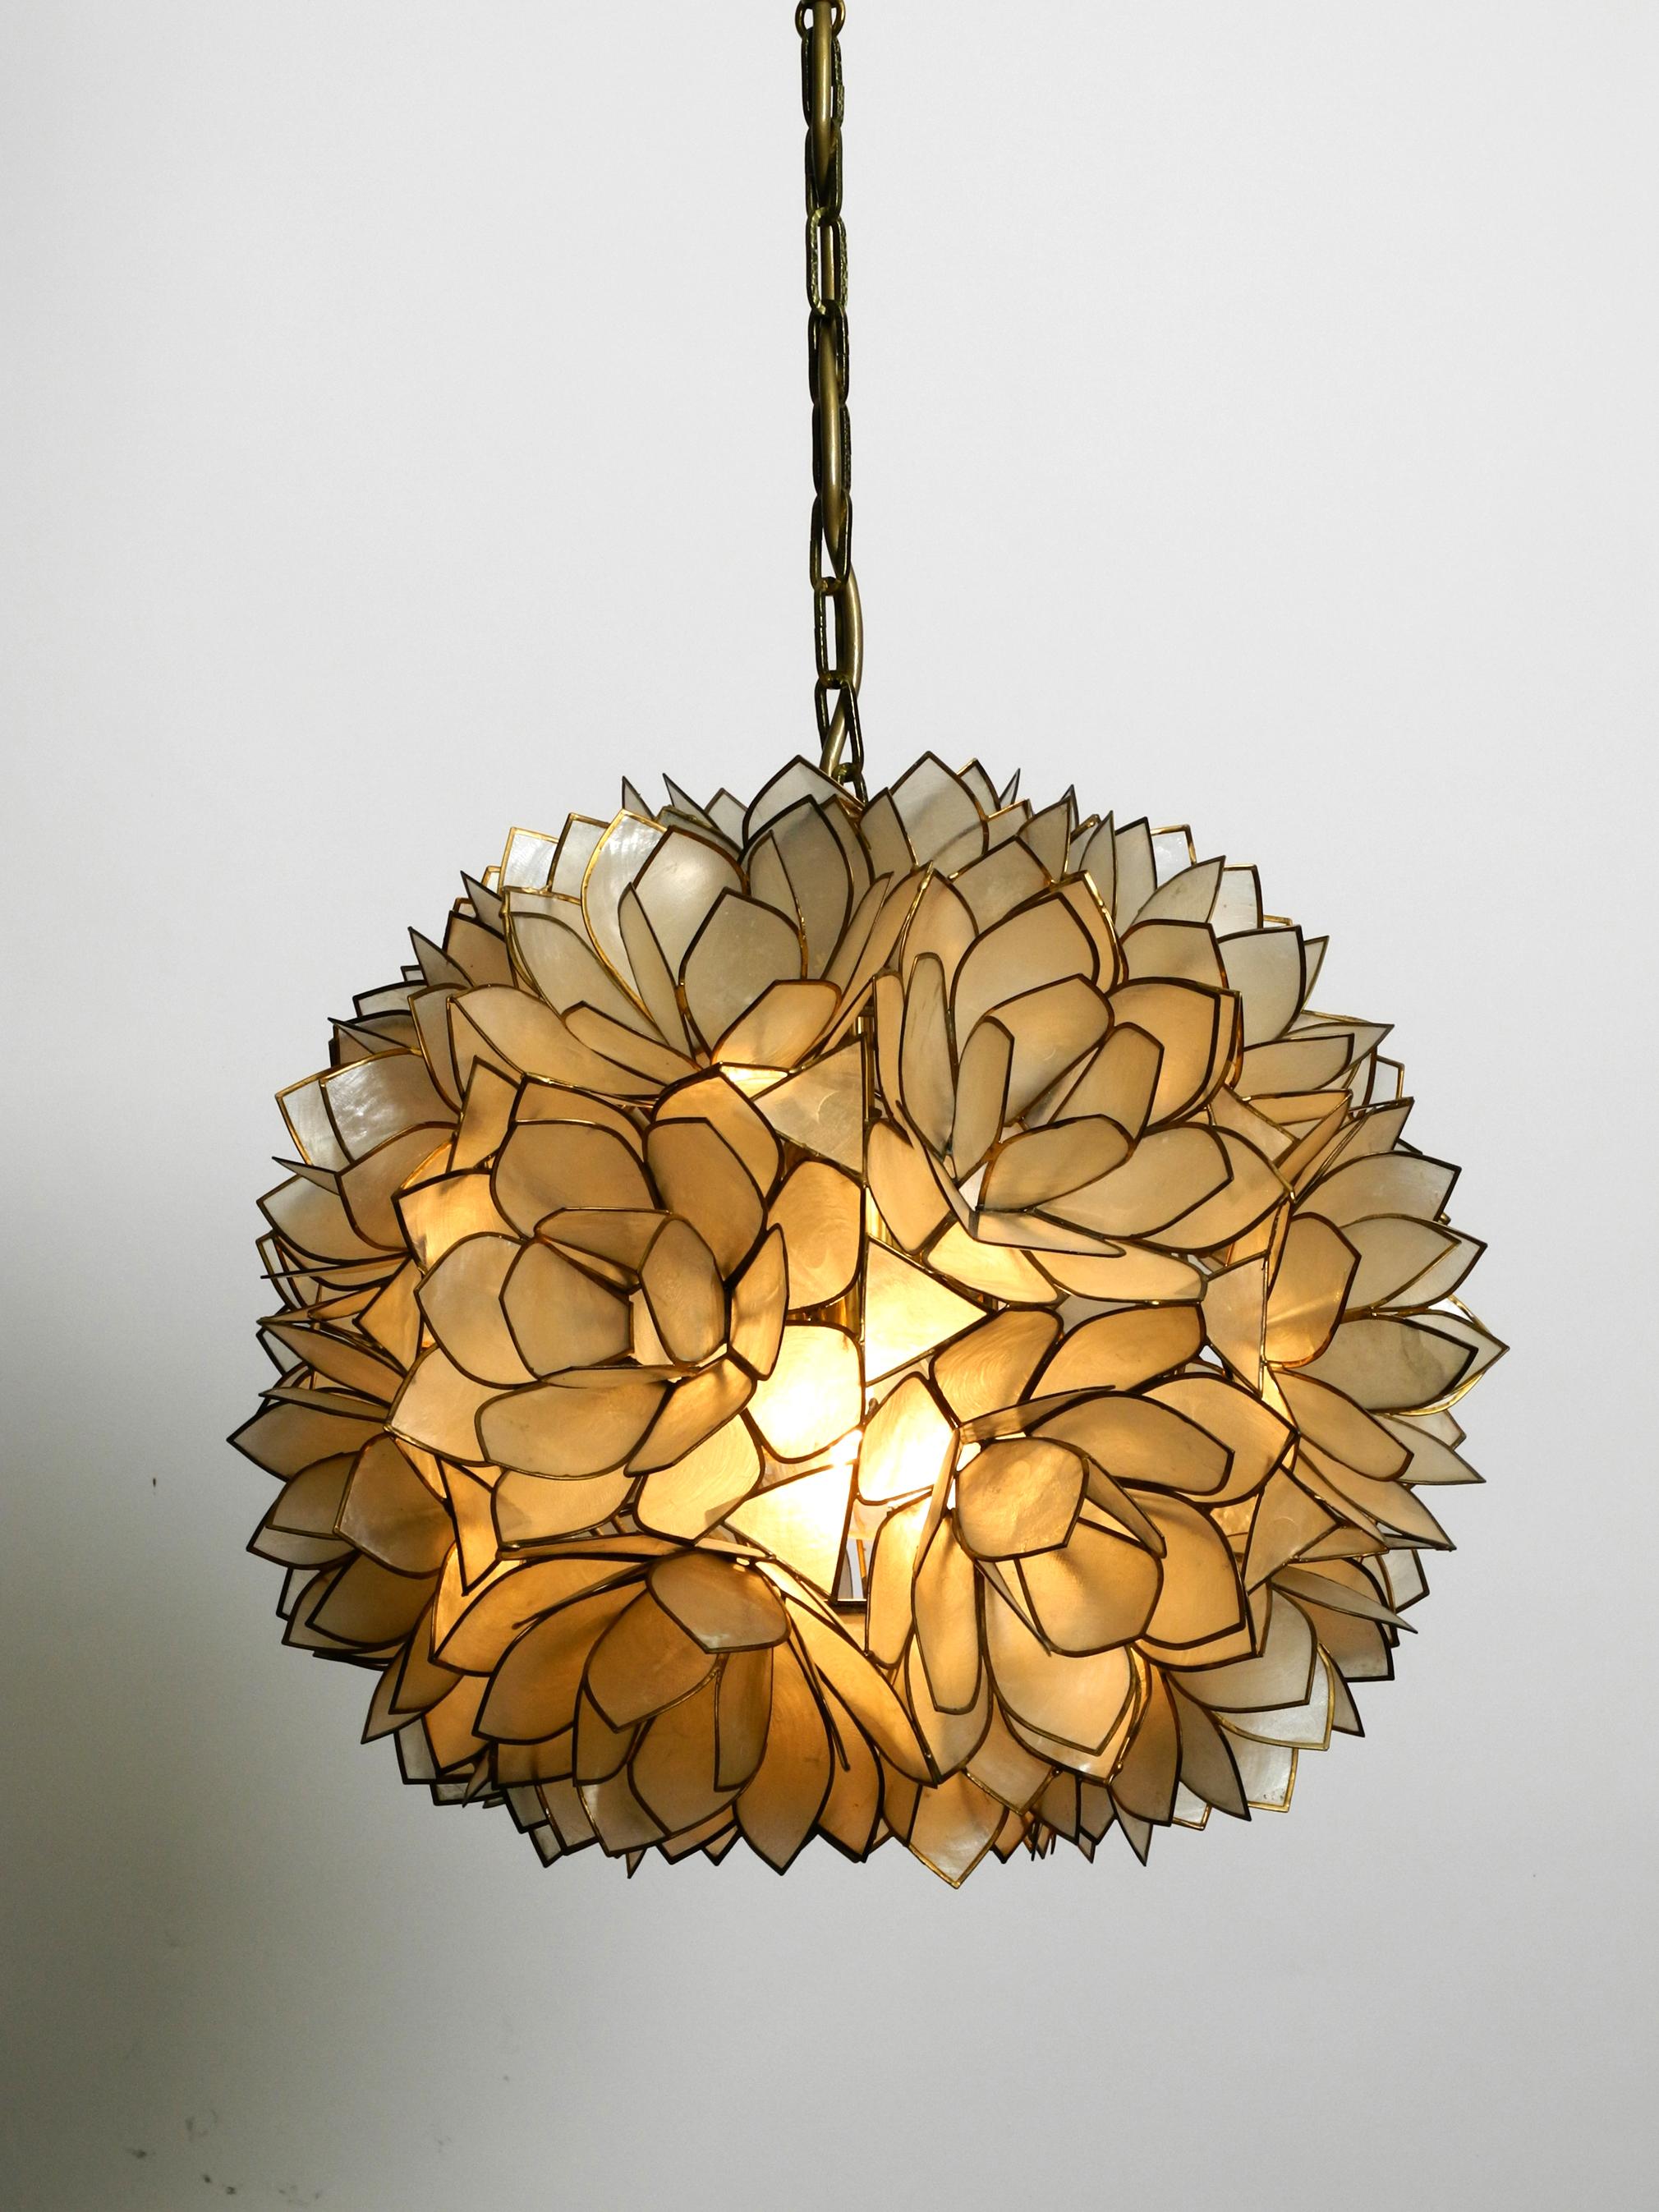 Hollywood Regency 1970s Spherical Pendant Lamp Made of Mother of Pearl in the Look of a Flower